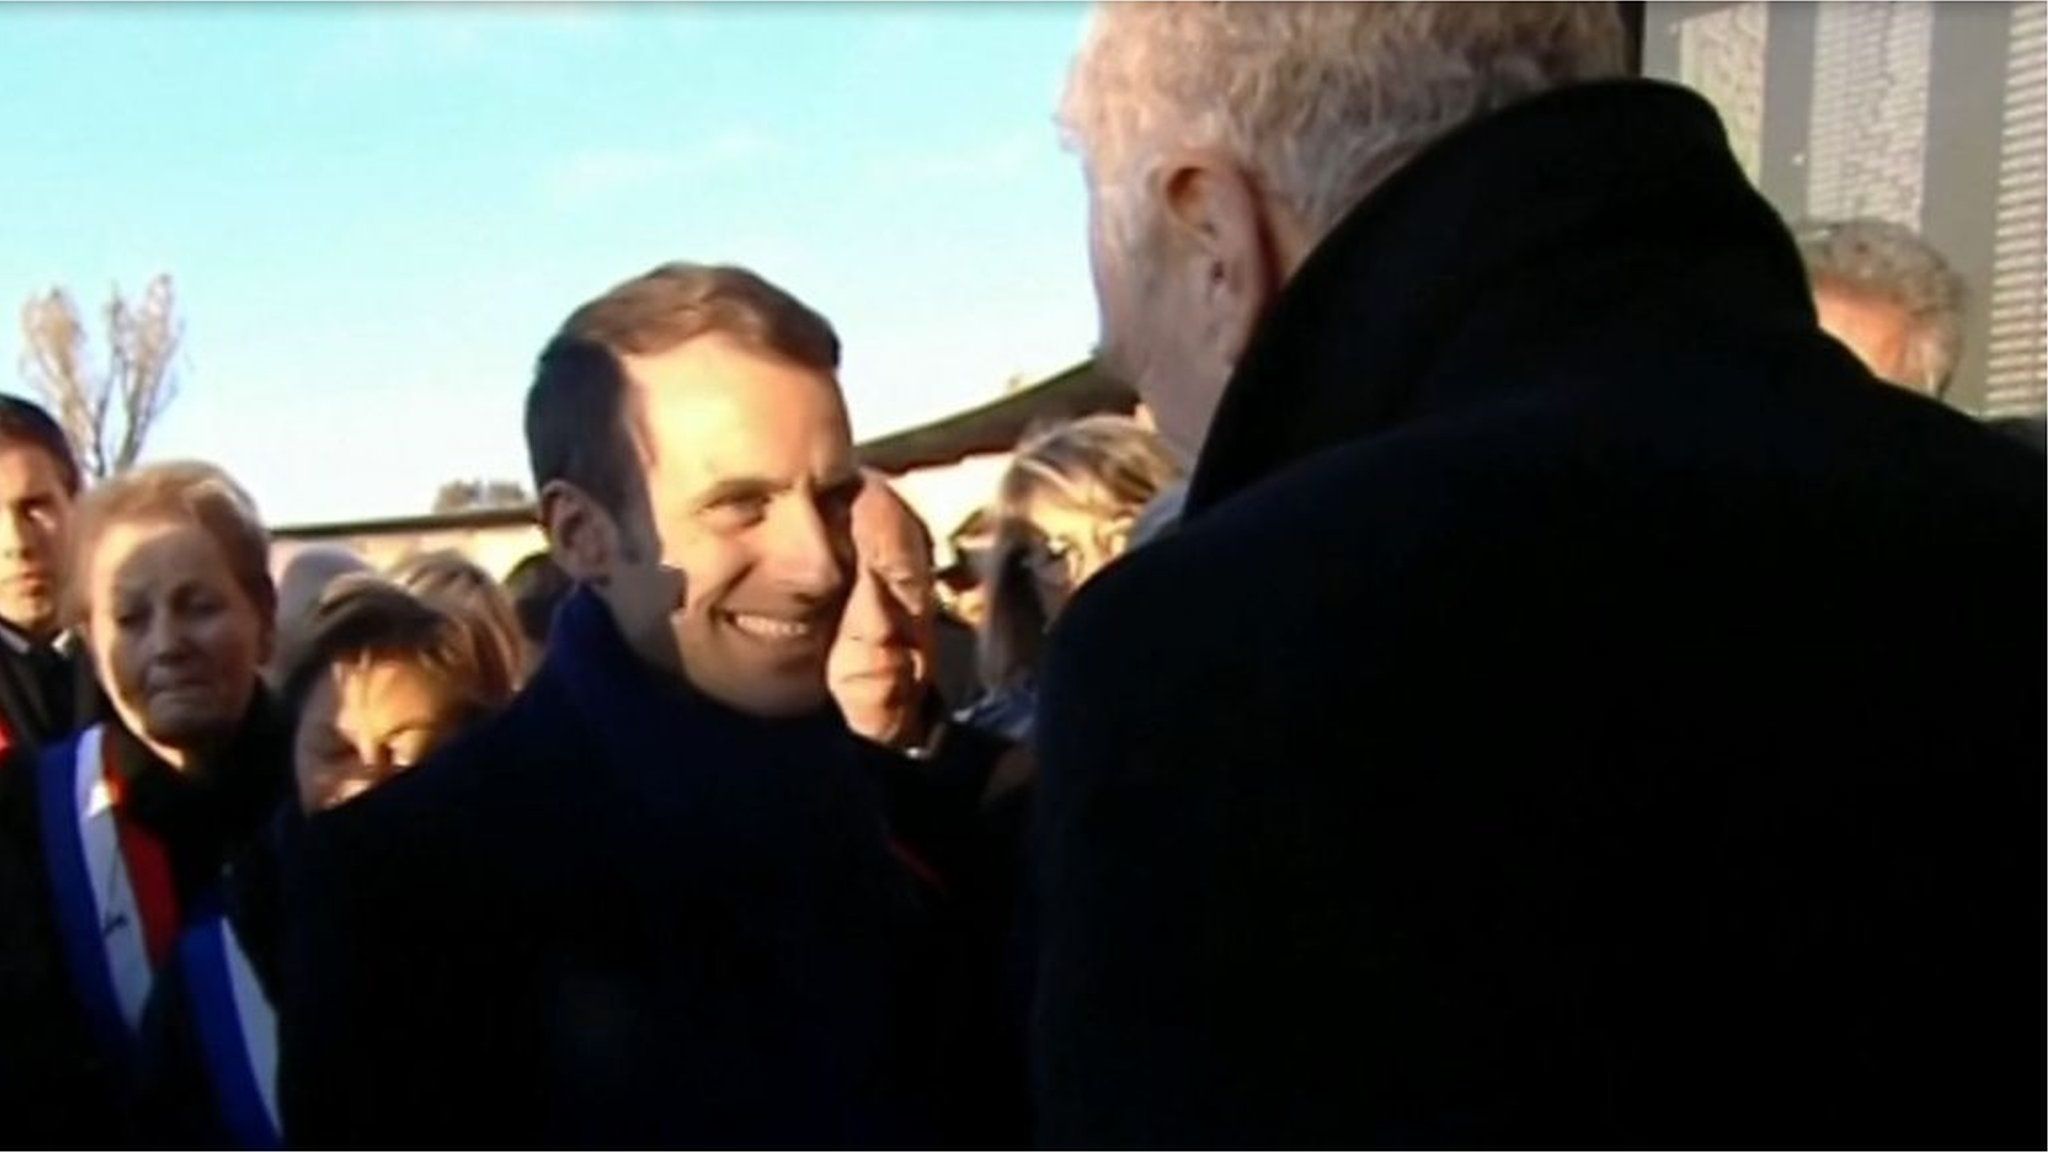 Emmanuel Macron invited BBC Essex presenter Dave Monk to France after hearing about his grandfather.